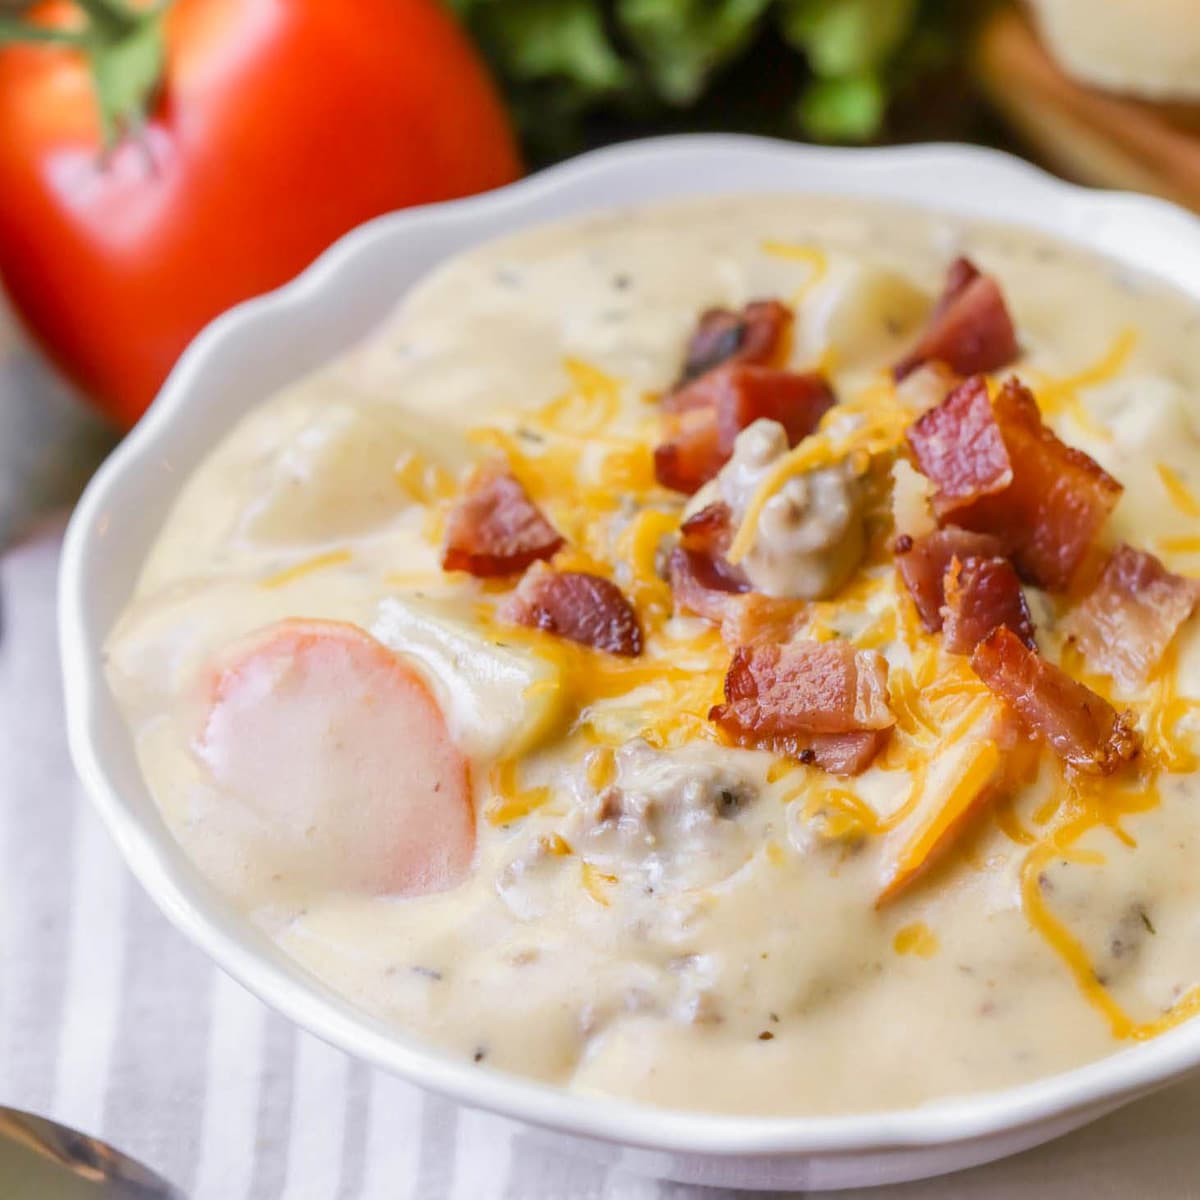 Fall soup recipes - cheeseburger soup topped with bacon crumbles and cheese.